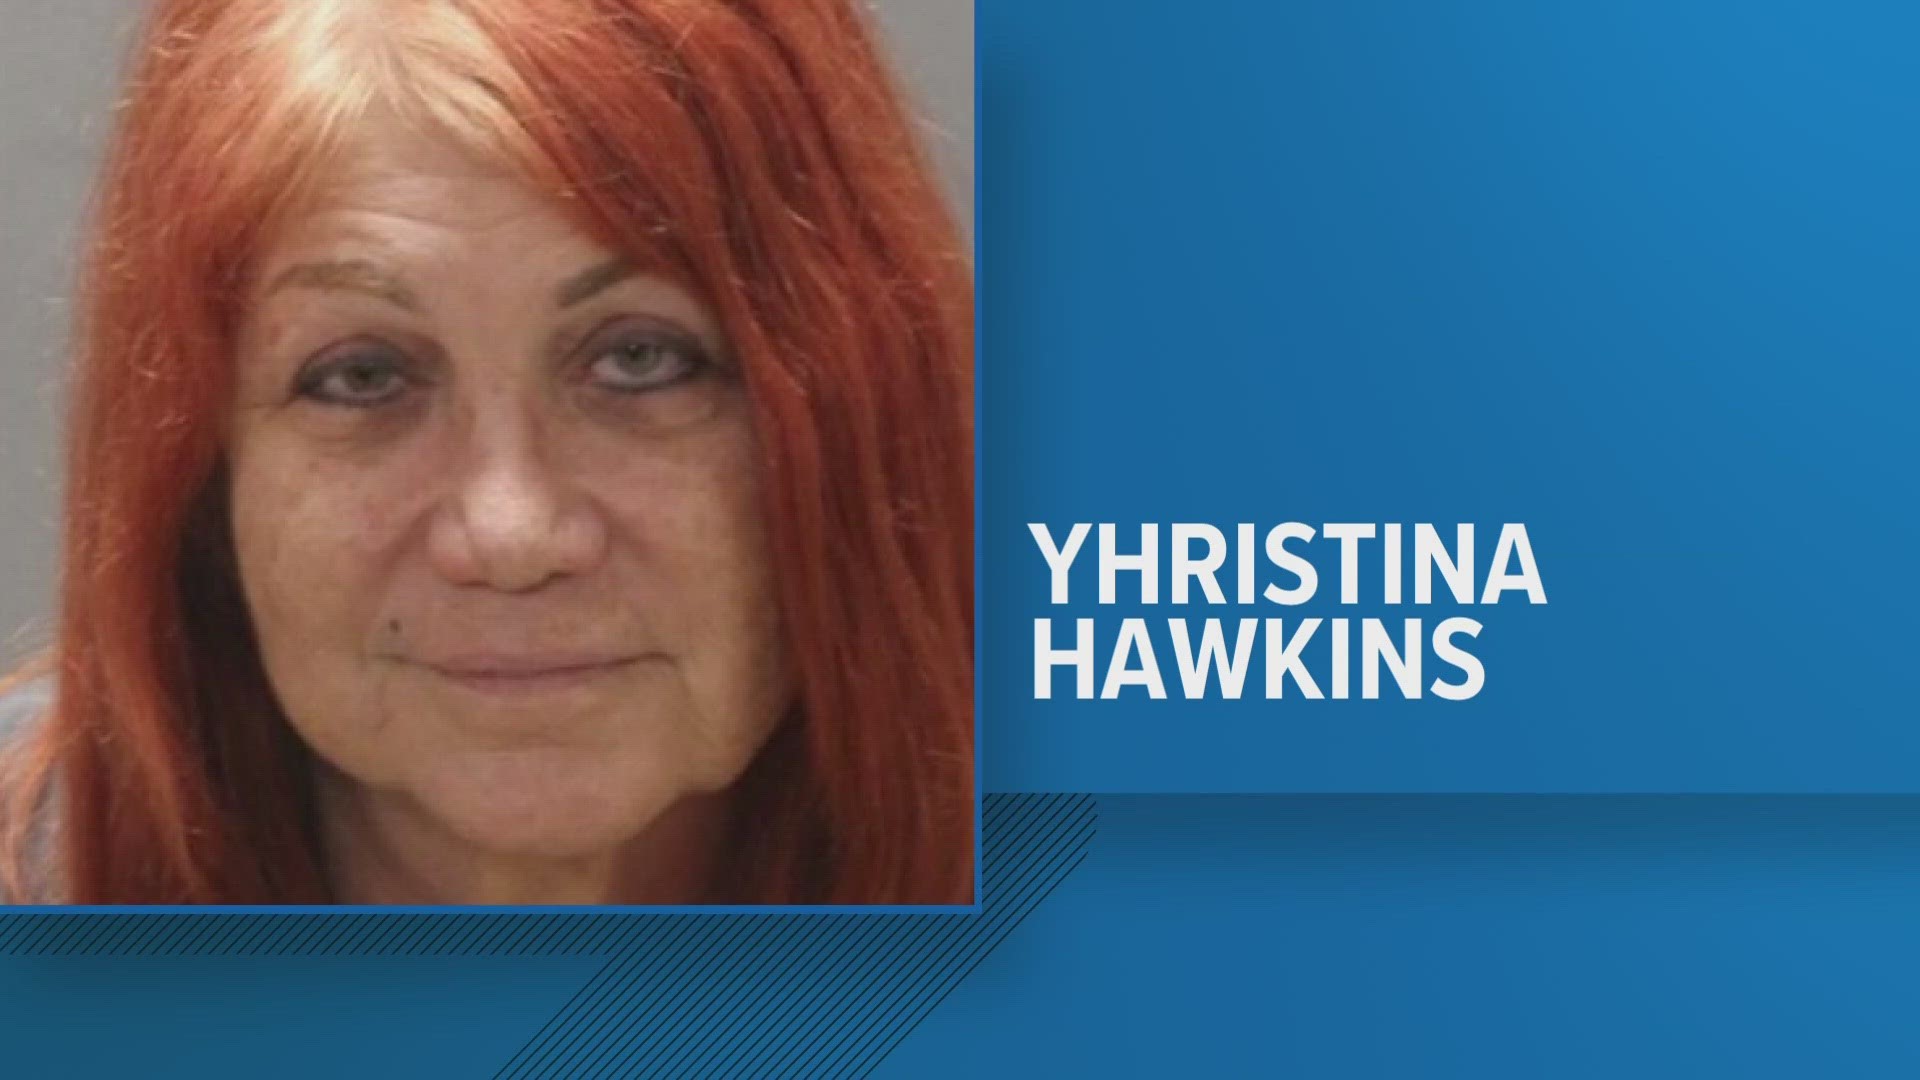 Yhristina Hawkins had 74 dogs seized from "deplorable conditions" at a home in December, the Jacksonville Sheriff's Office said.